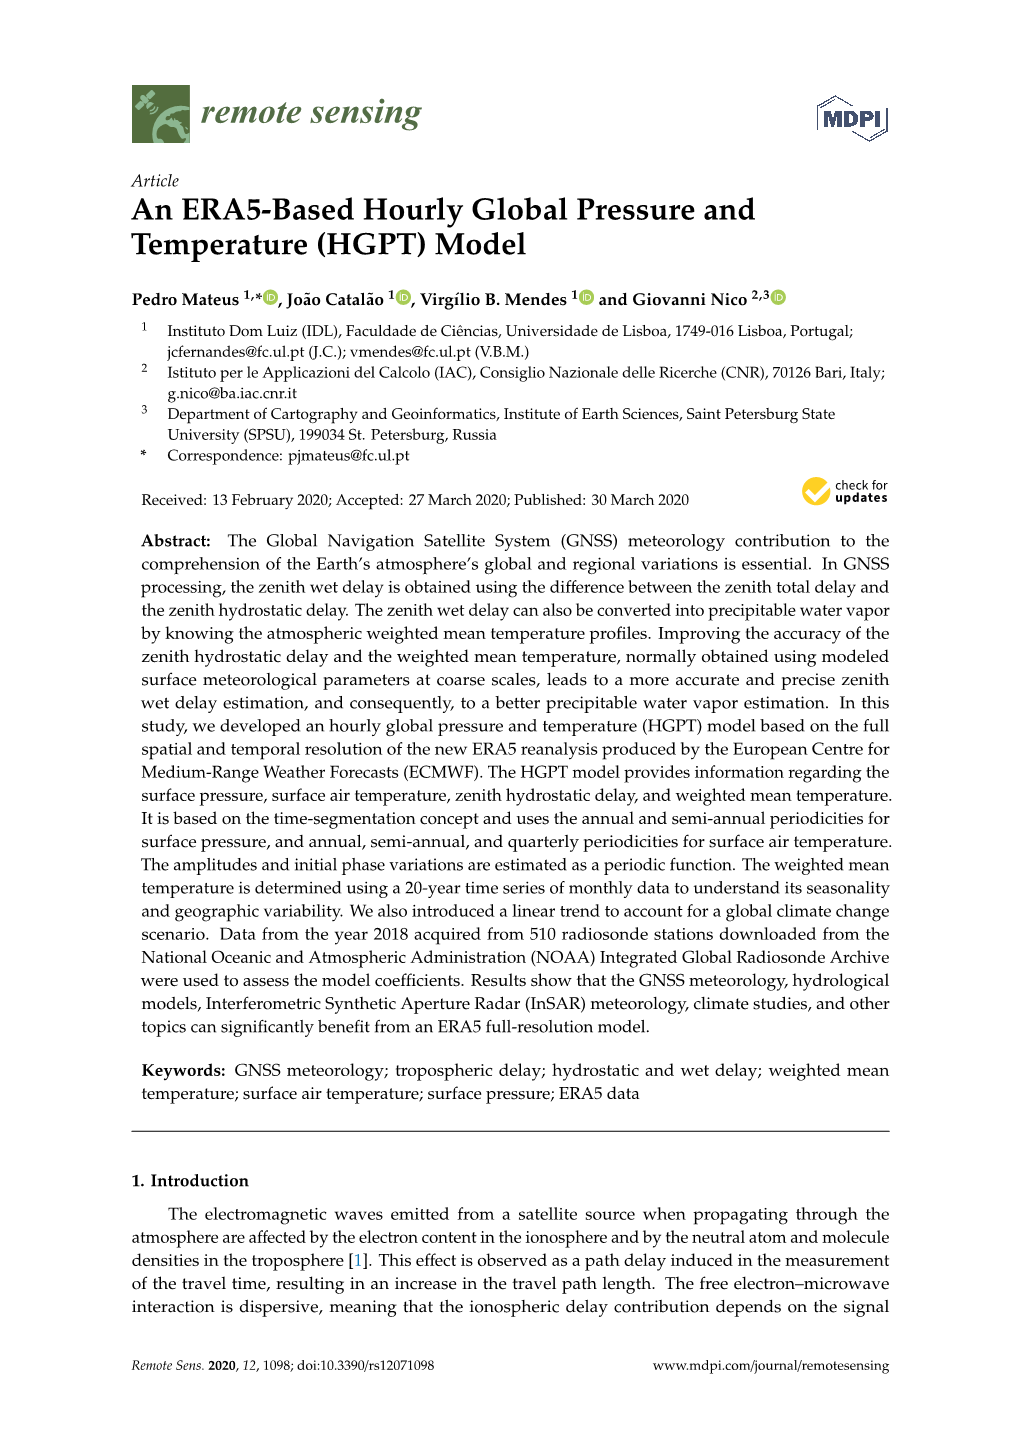 An ERA5-Based Hourly Global Pressure and Temperature (HGPT) Model